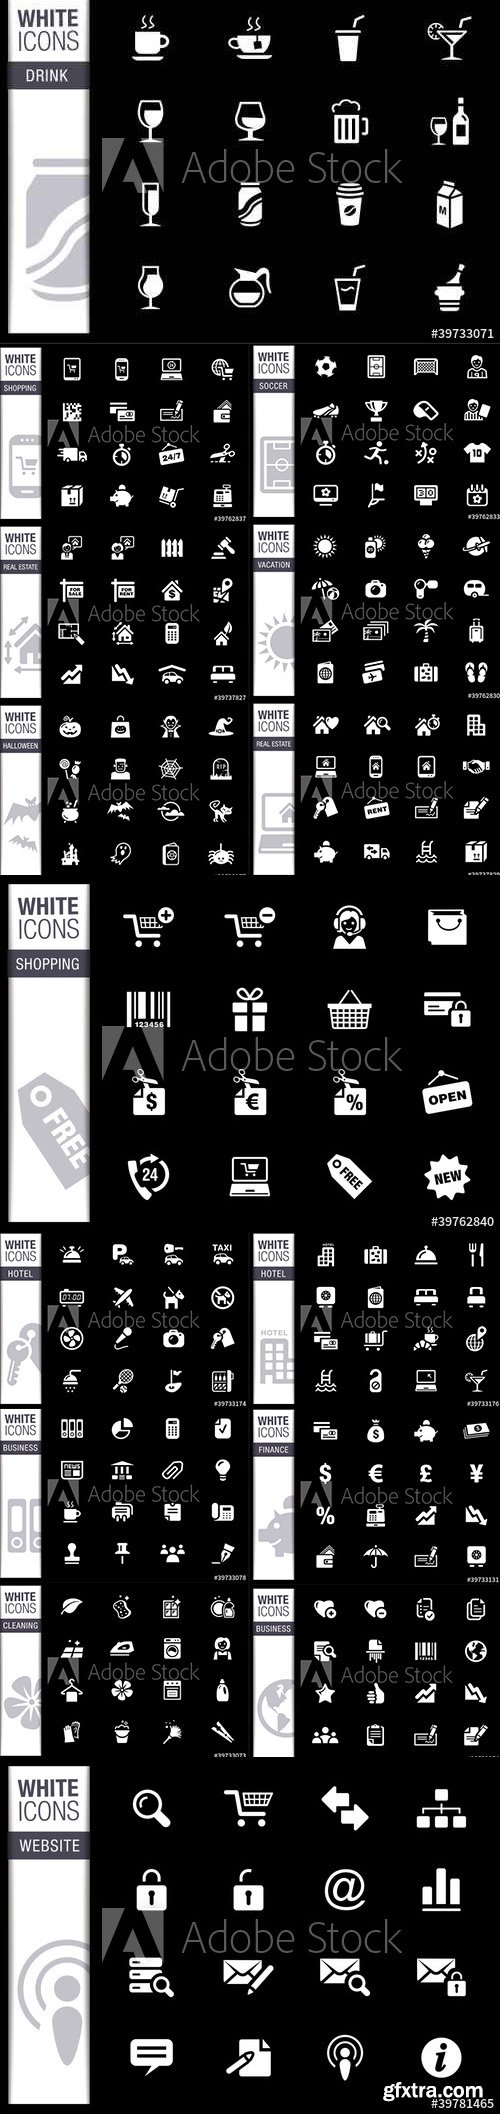 Vector Collection - WHITE Icons Pack Vol 2